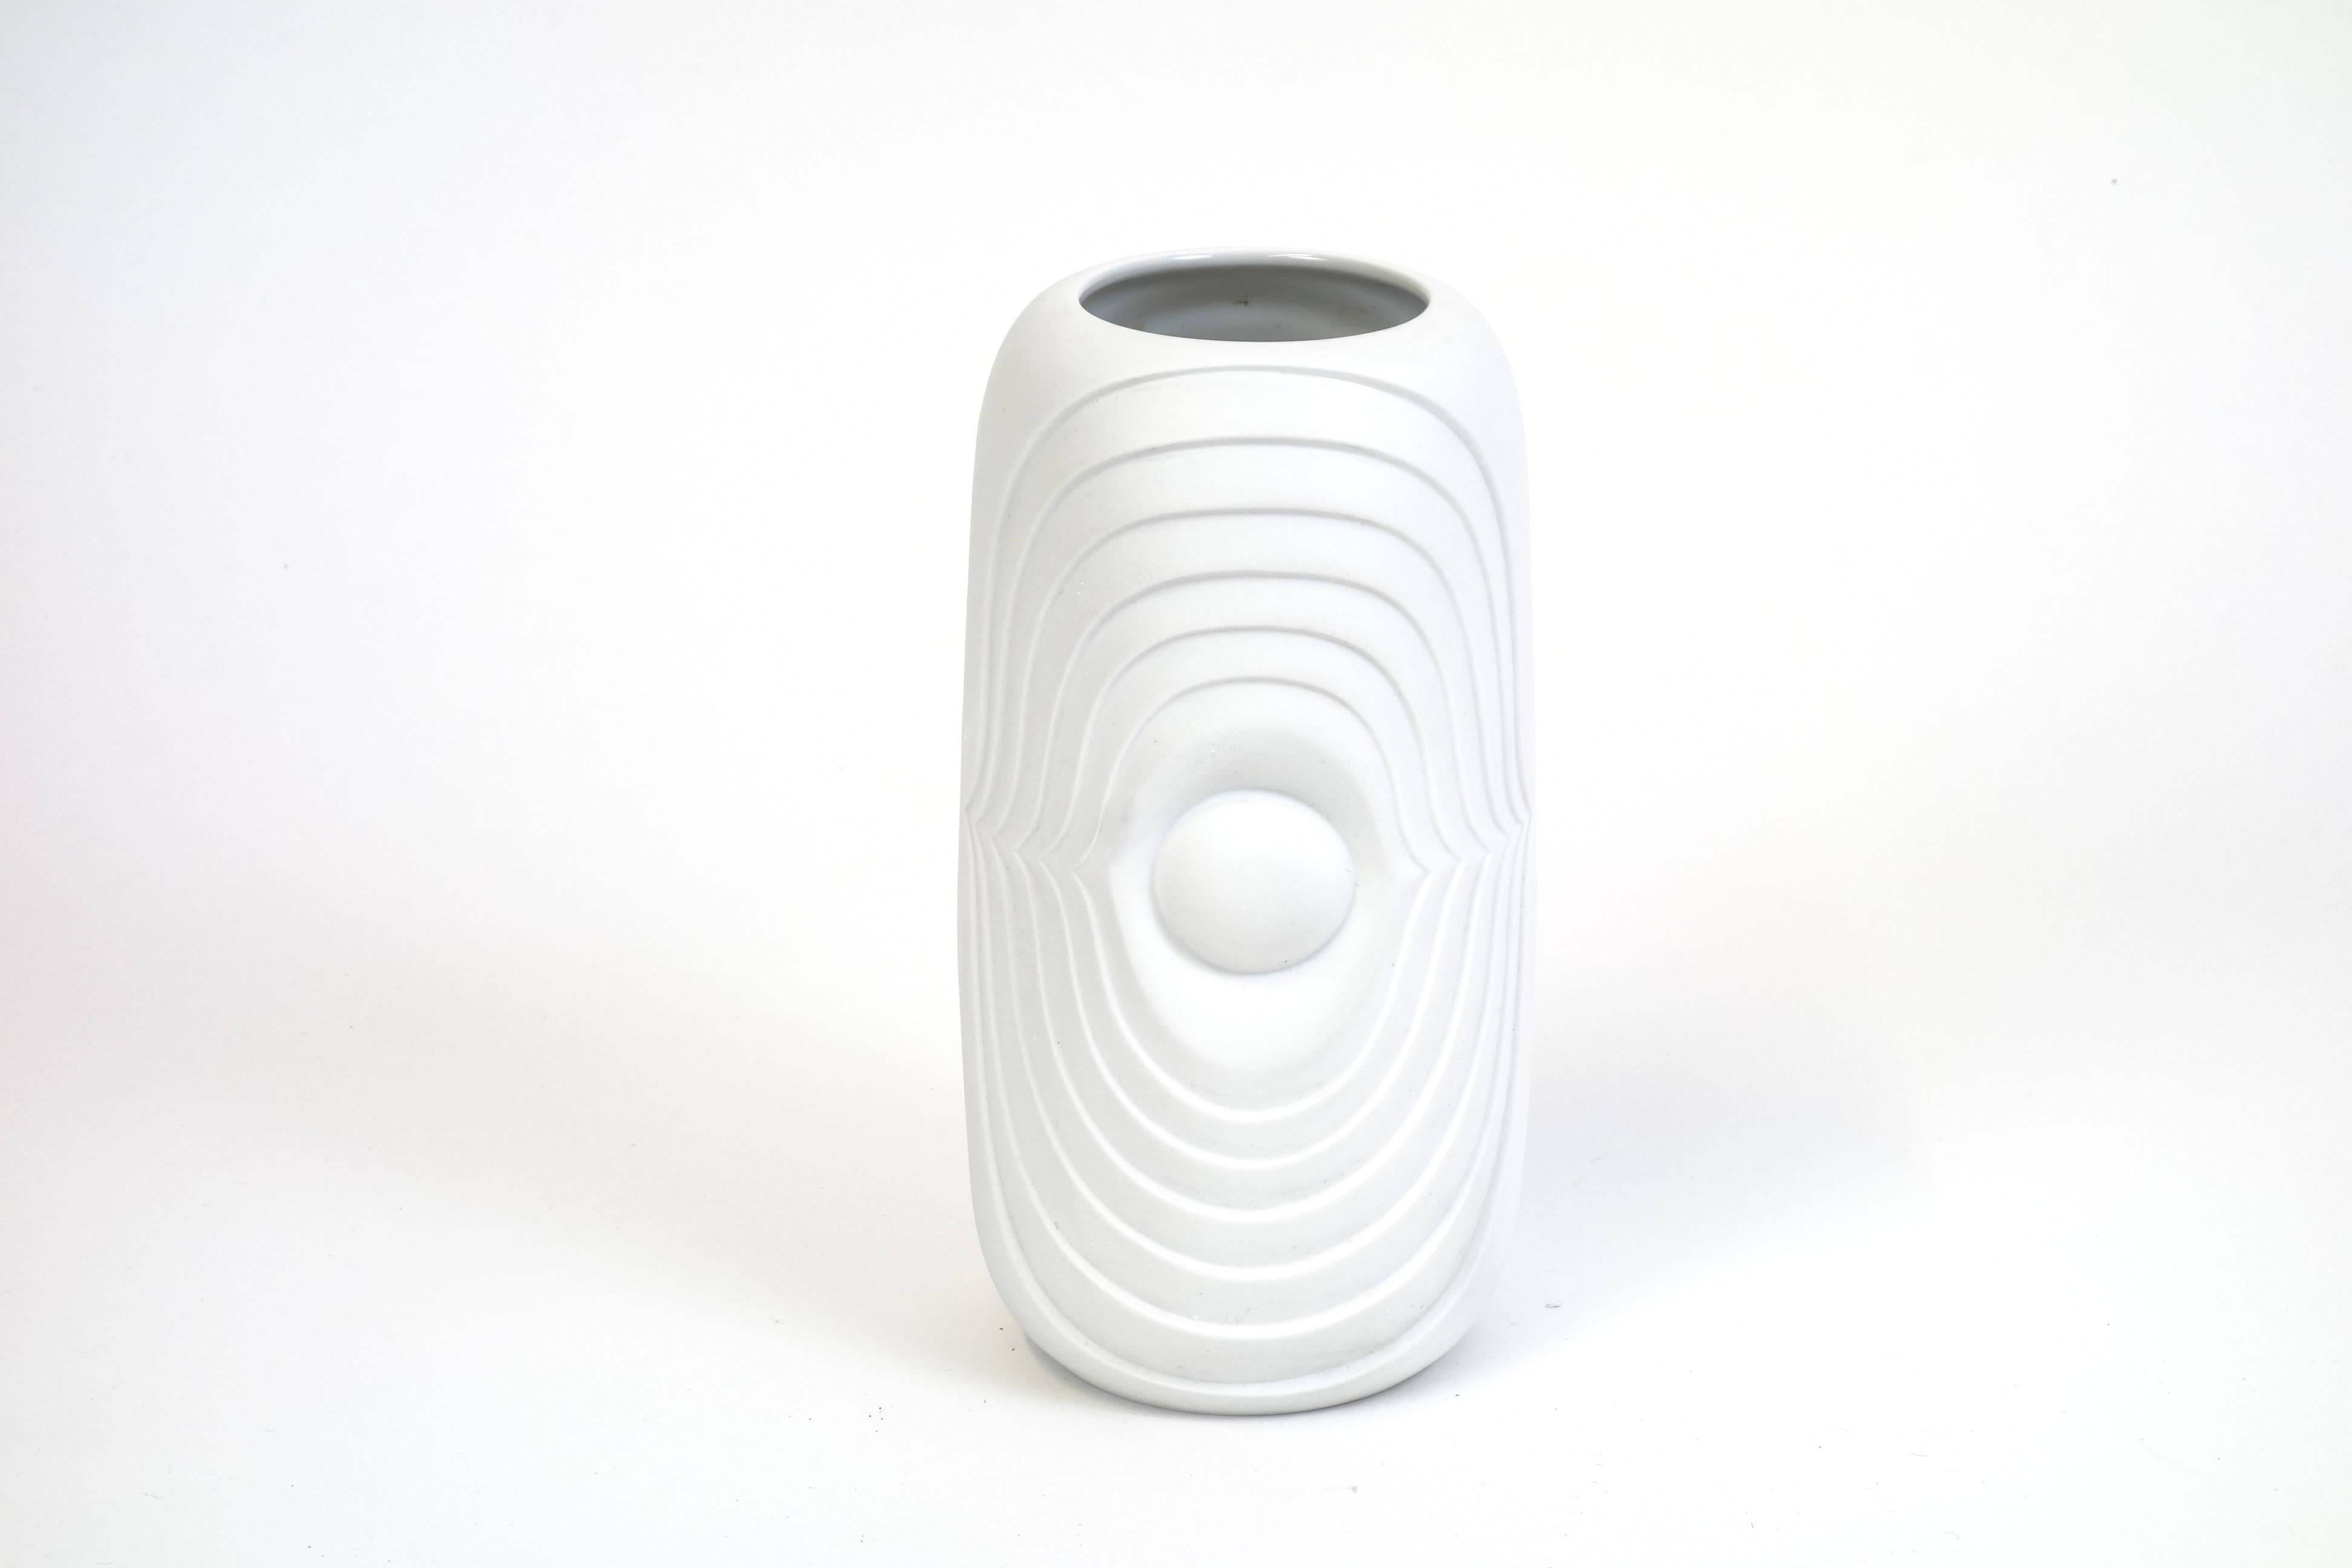 An exquisite vintage white bisque porcelain vase manufactured by KPM Berlin, Germany in the late 1960s. A significant statement of a time that breaks with traditional style without betraying its class. The frosted surface provides distinguished